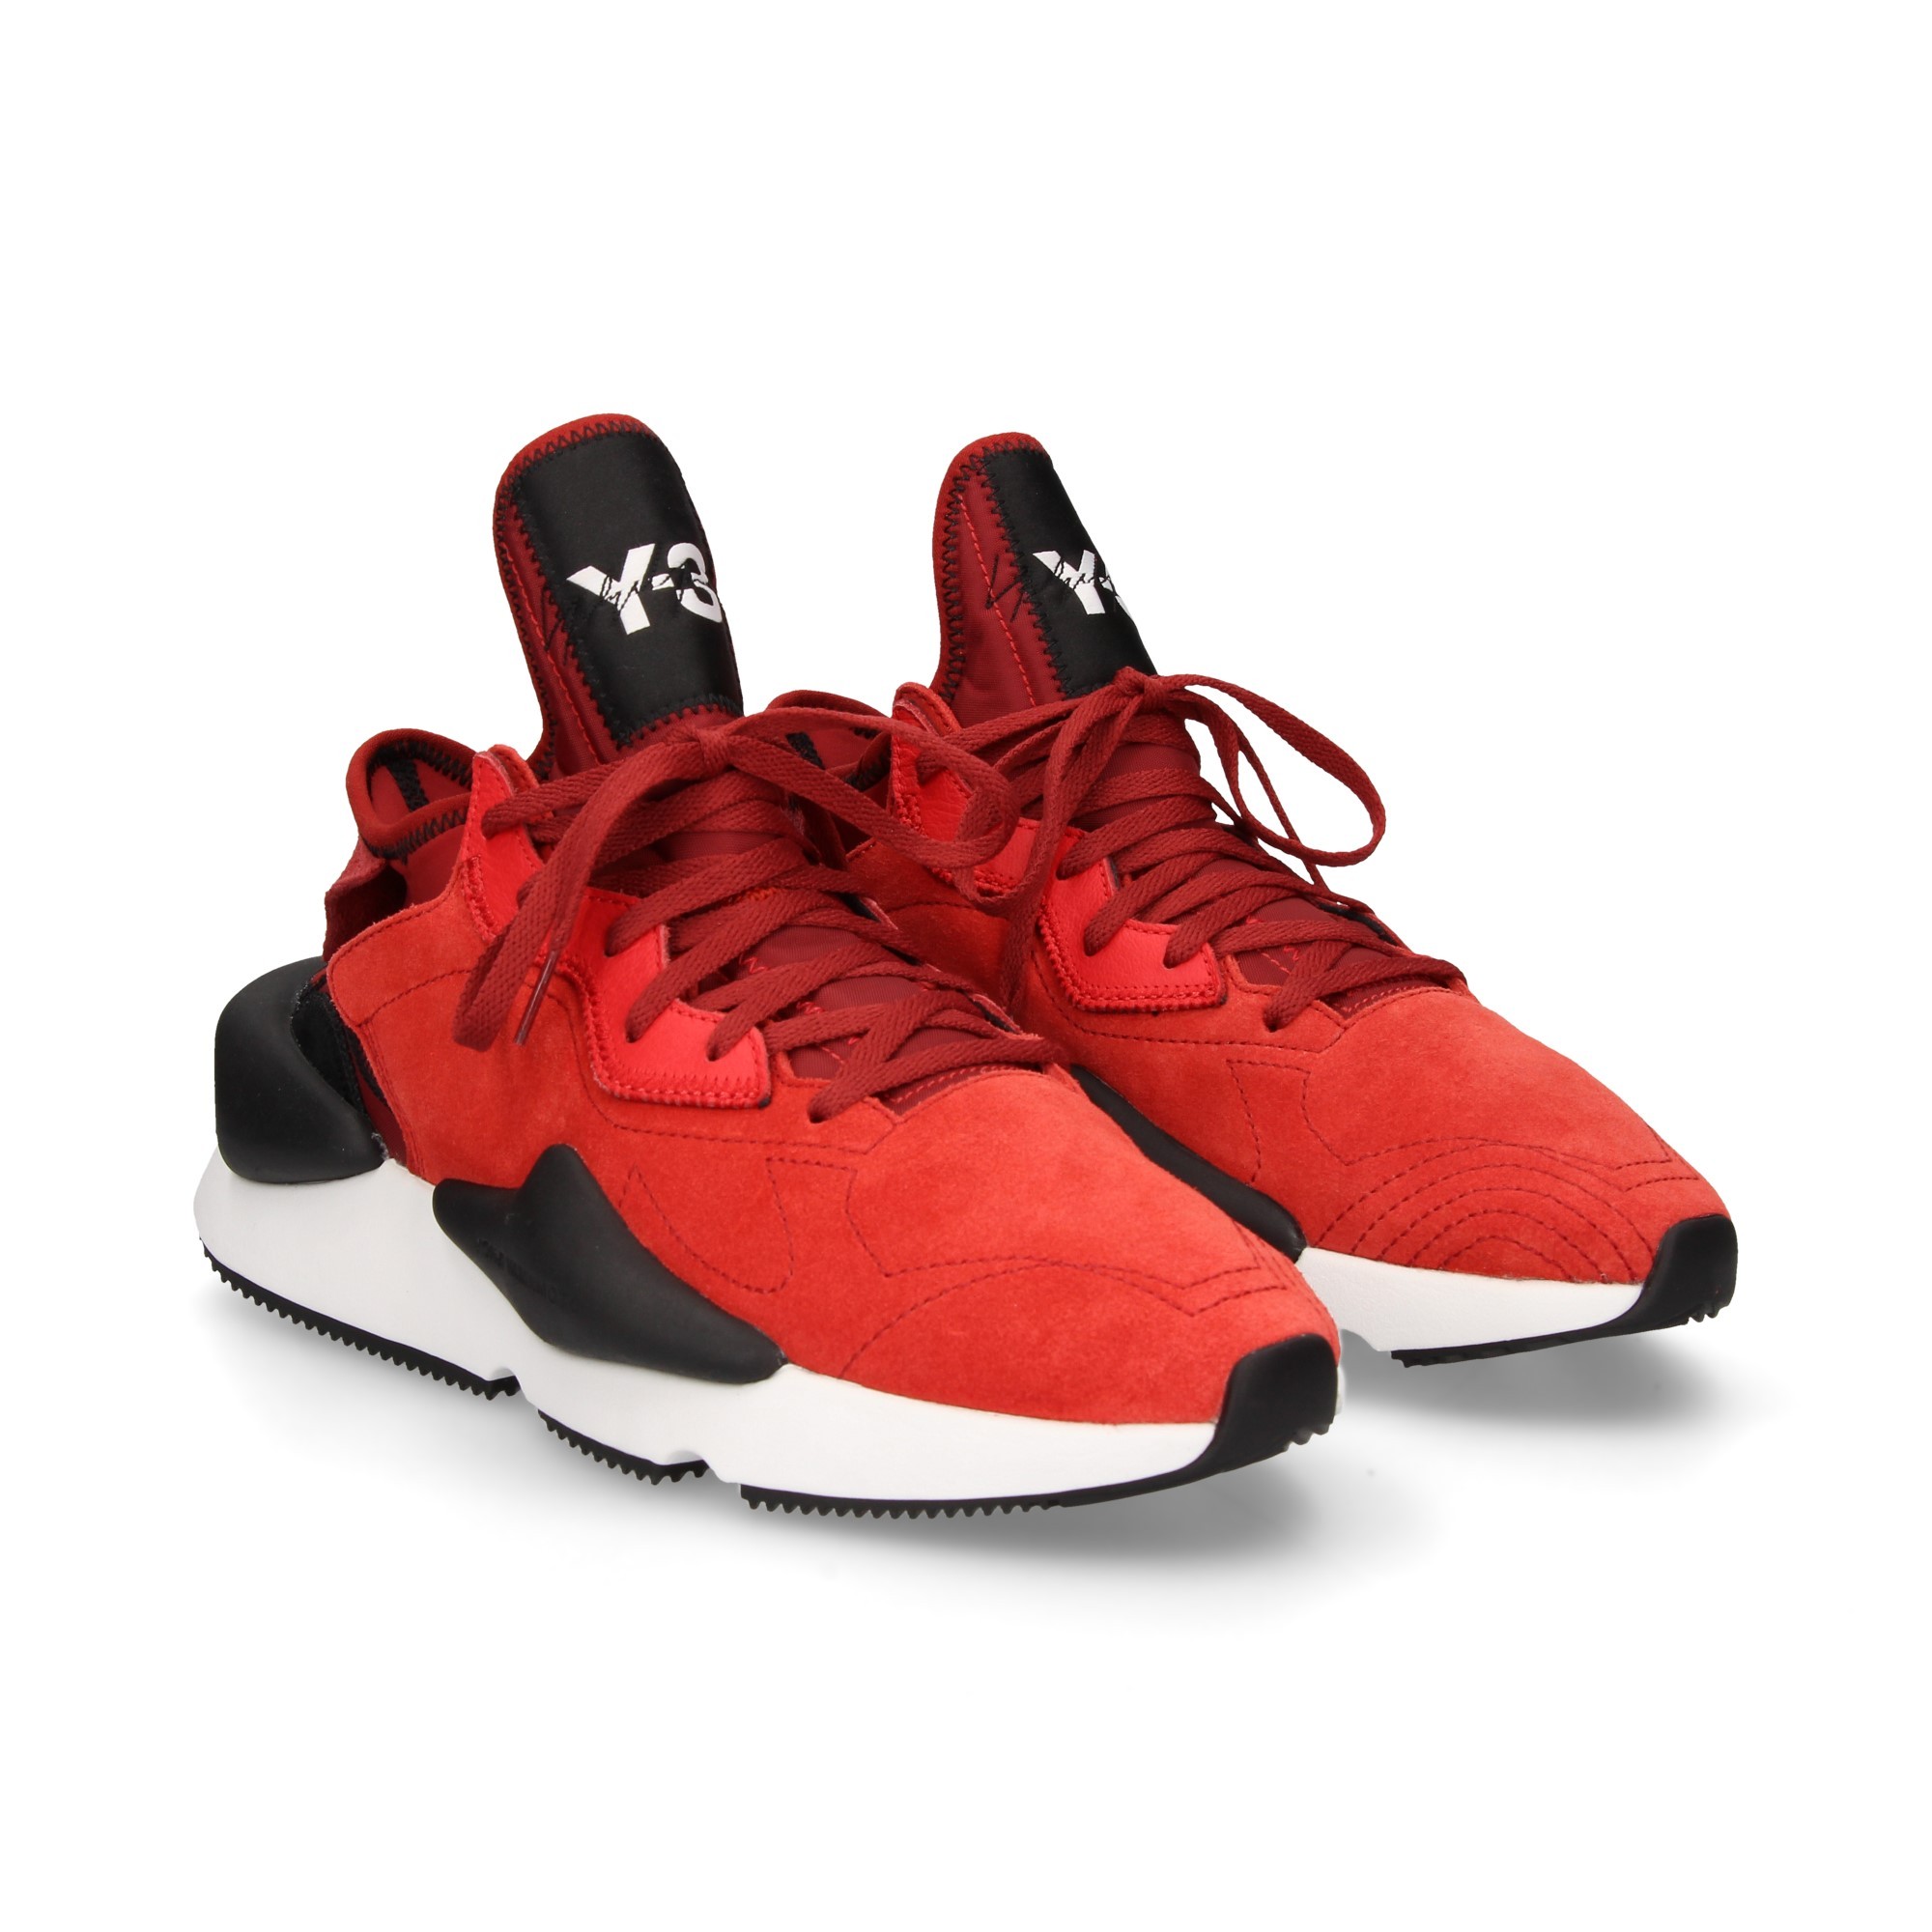 y3 red shoes